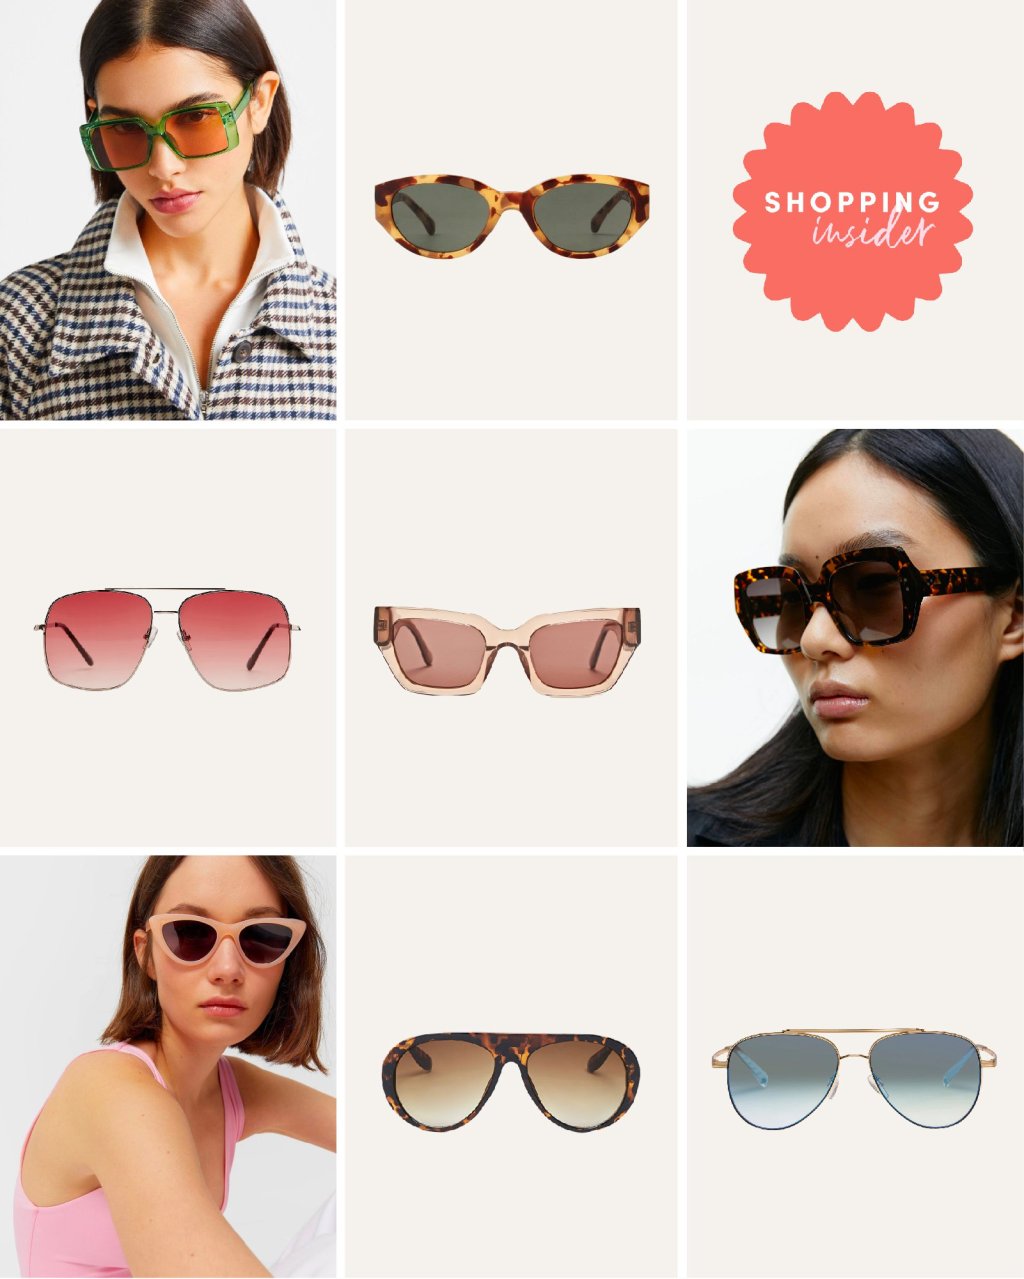 Best Sunglasses for Square Faces - All About Vision